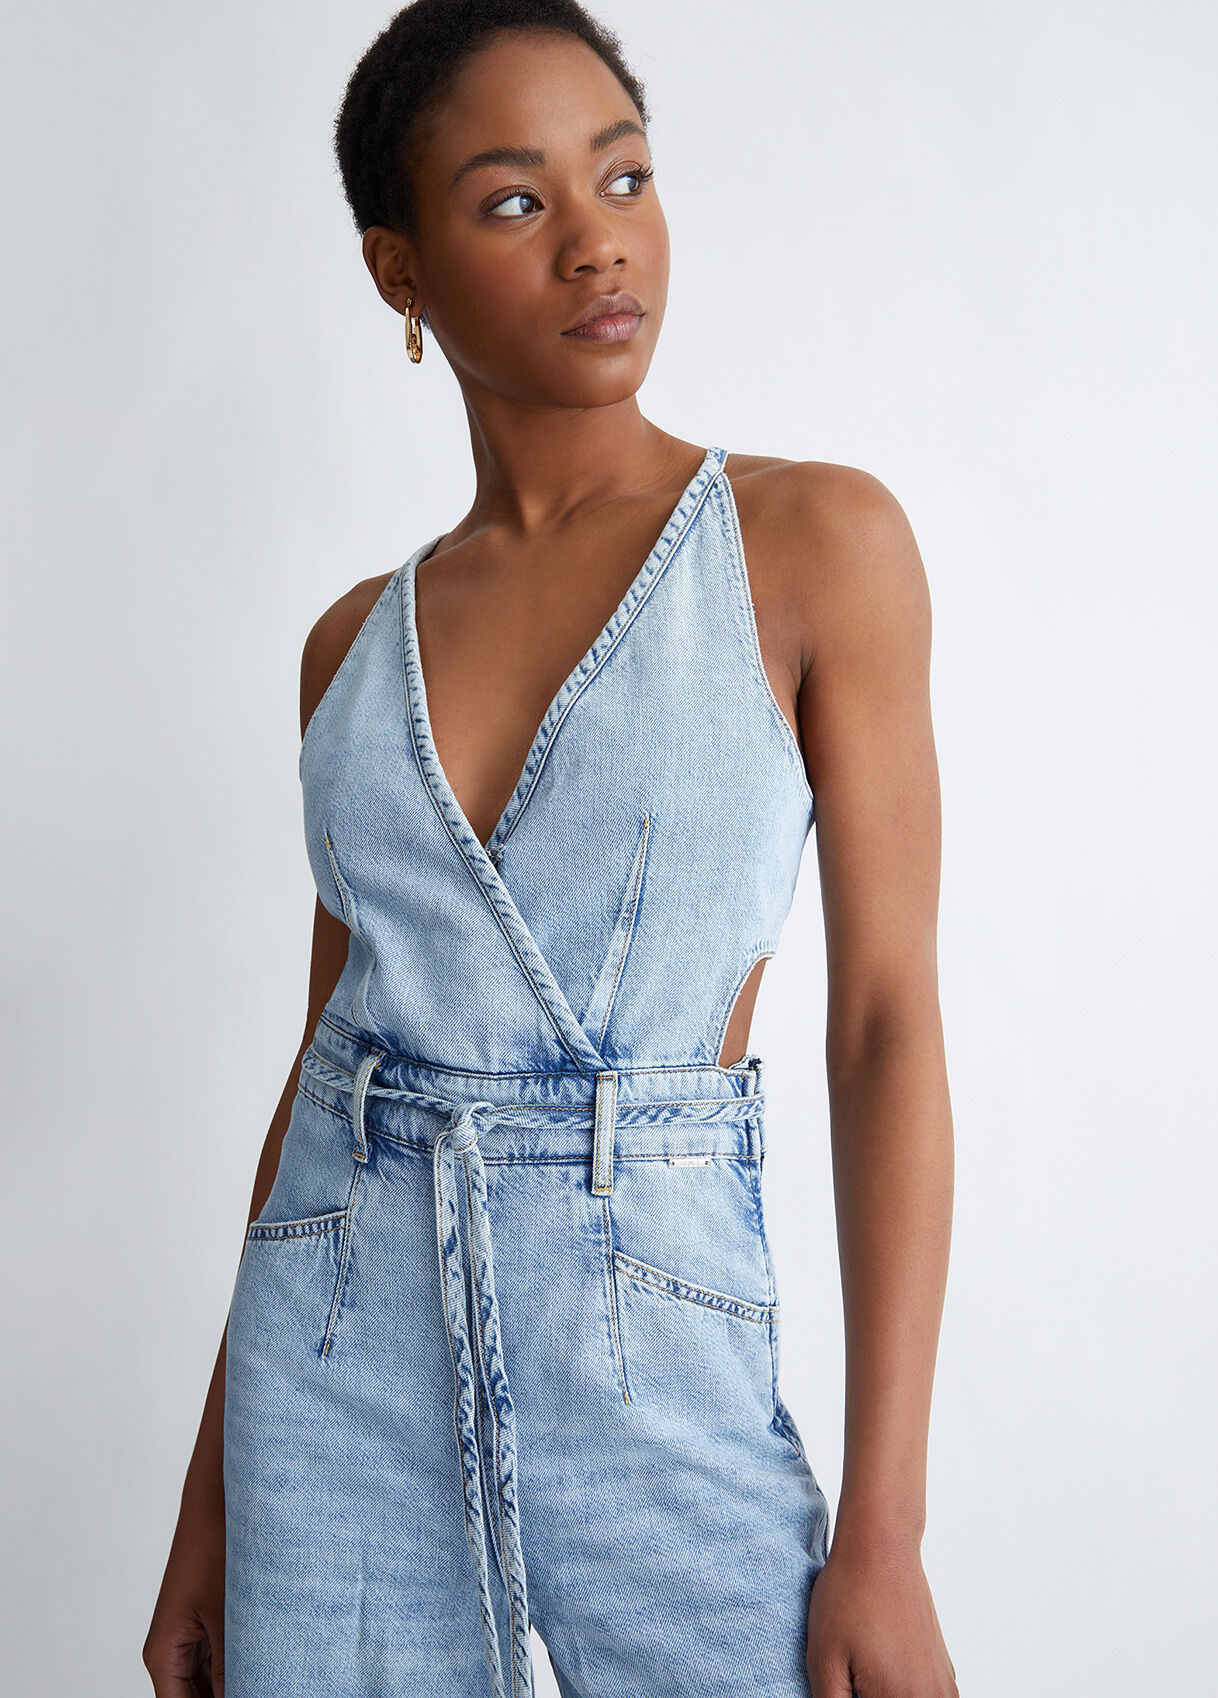 Denim Jumpsuit Summer Outfits (11 ideas & outfits) | Lookastic